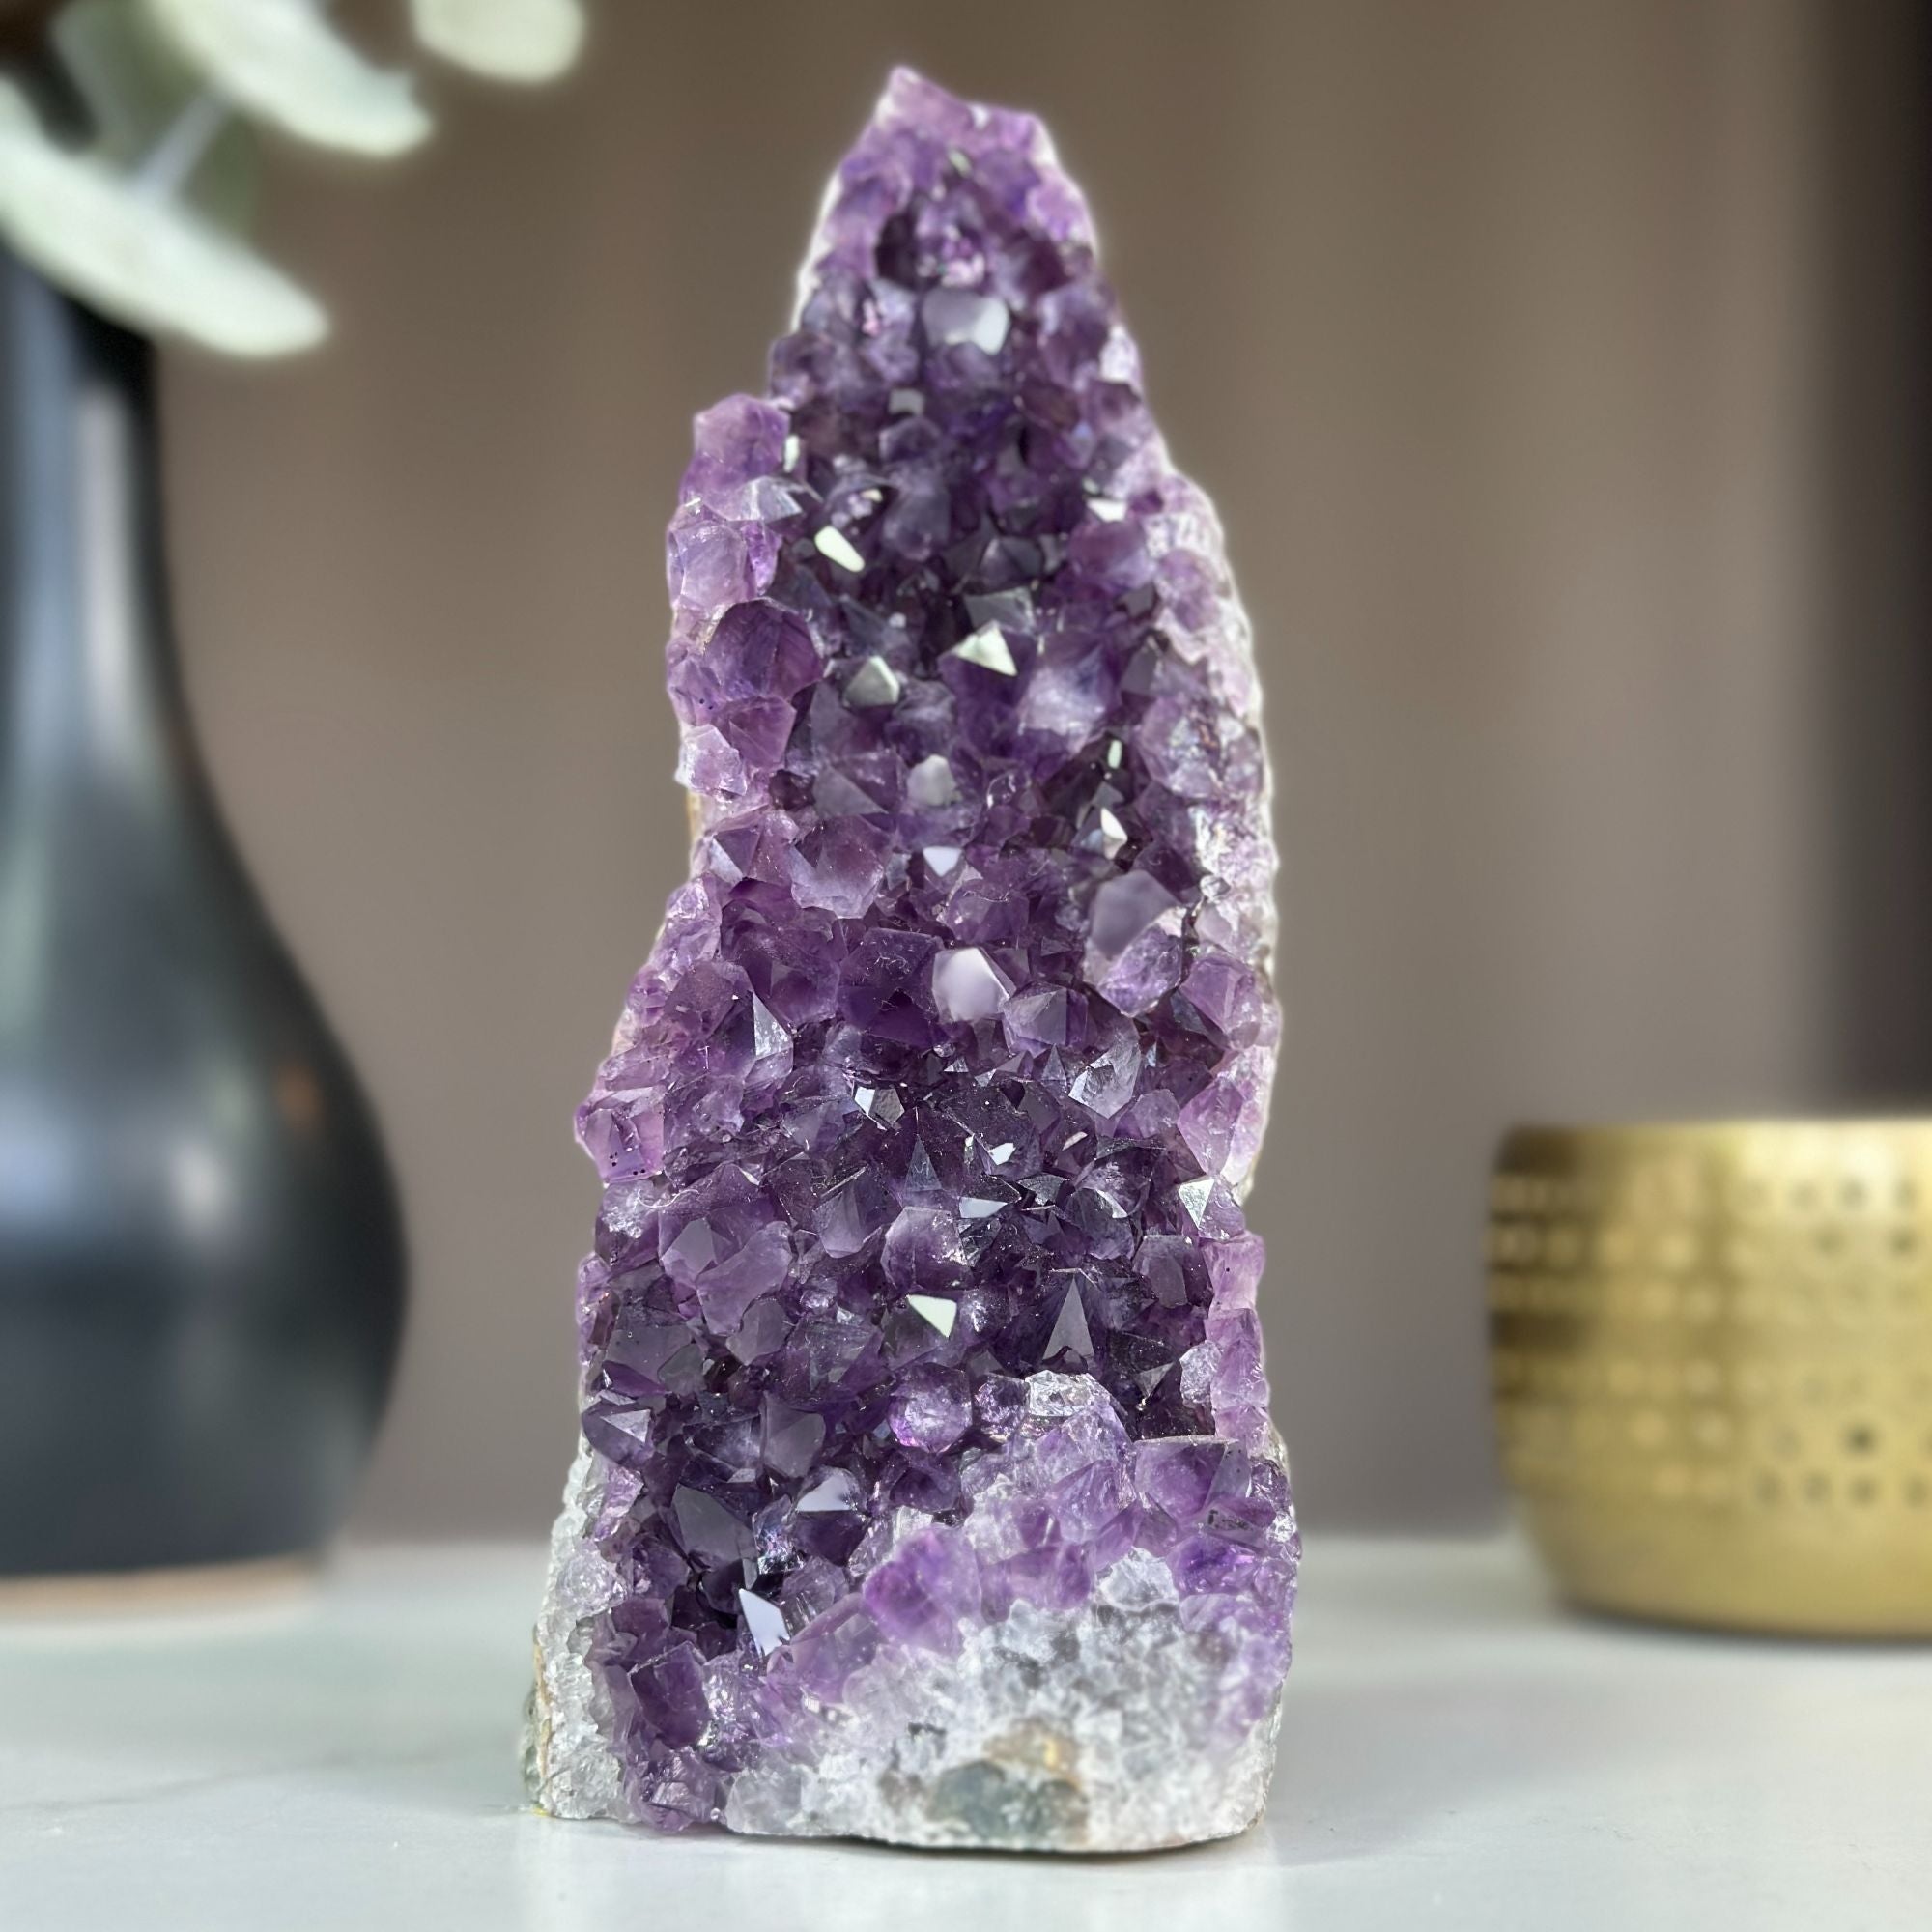 Huge Amethyst Crystal Cluster With Cut Base, 6 to 7 inches amethyst